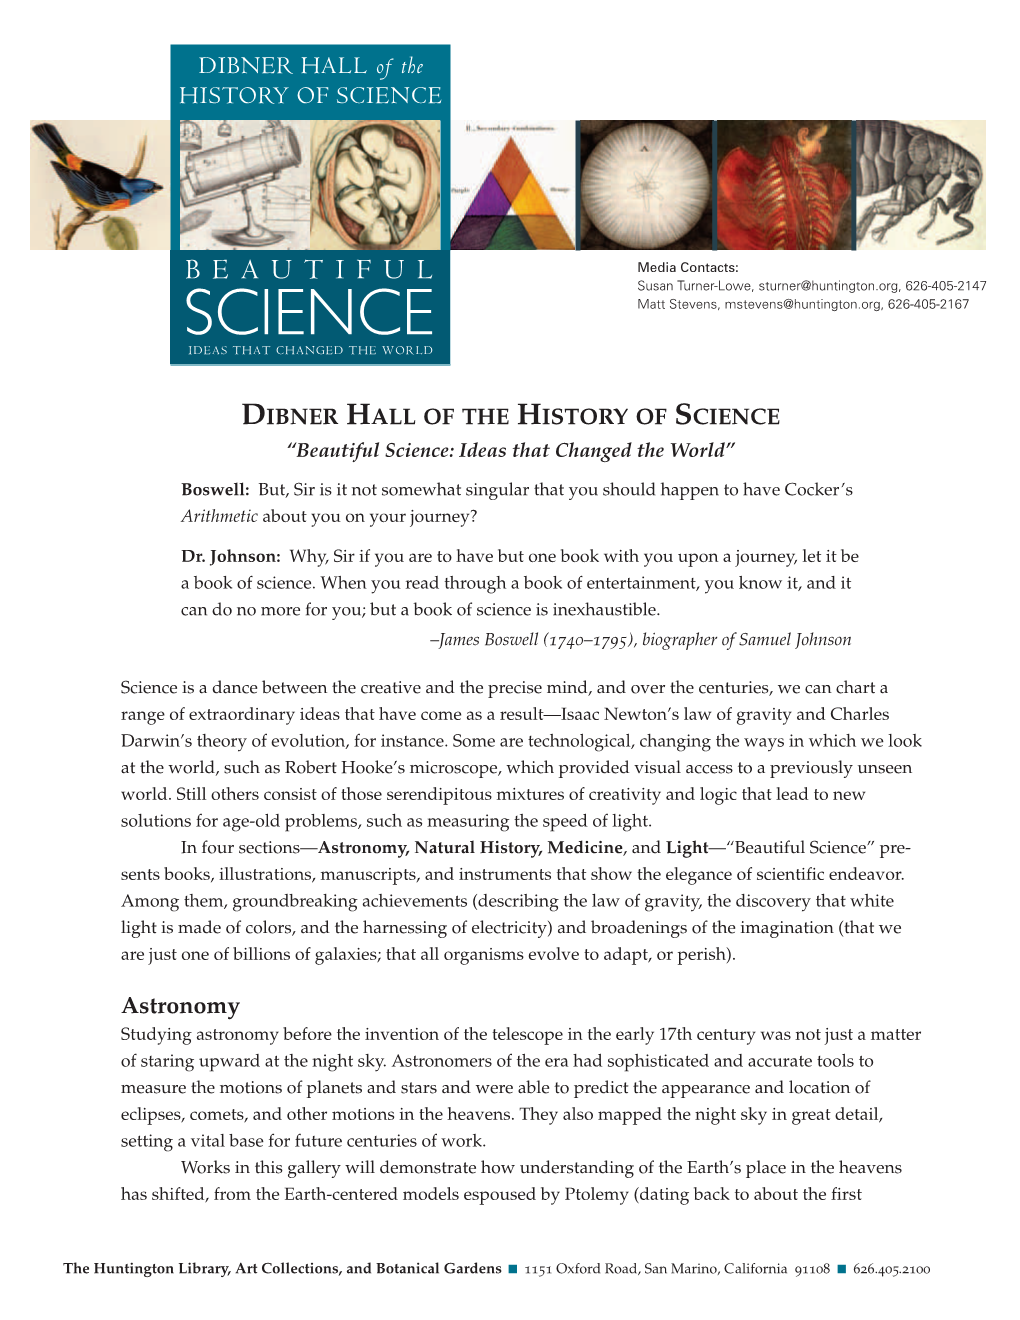 DIBNER HALL of the HISTORY of SCIENCE “Beautiful Science: Ideas That Changed the World ”